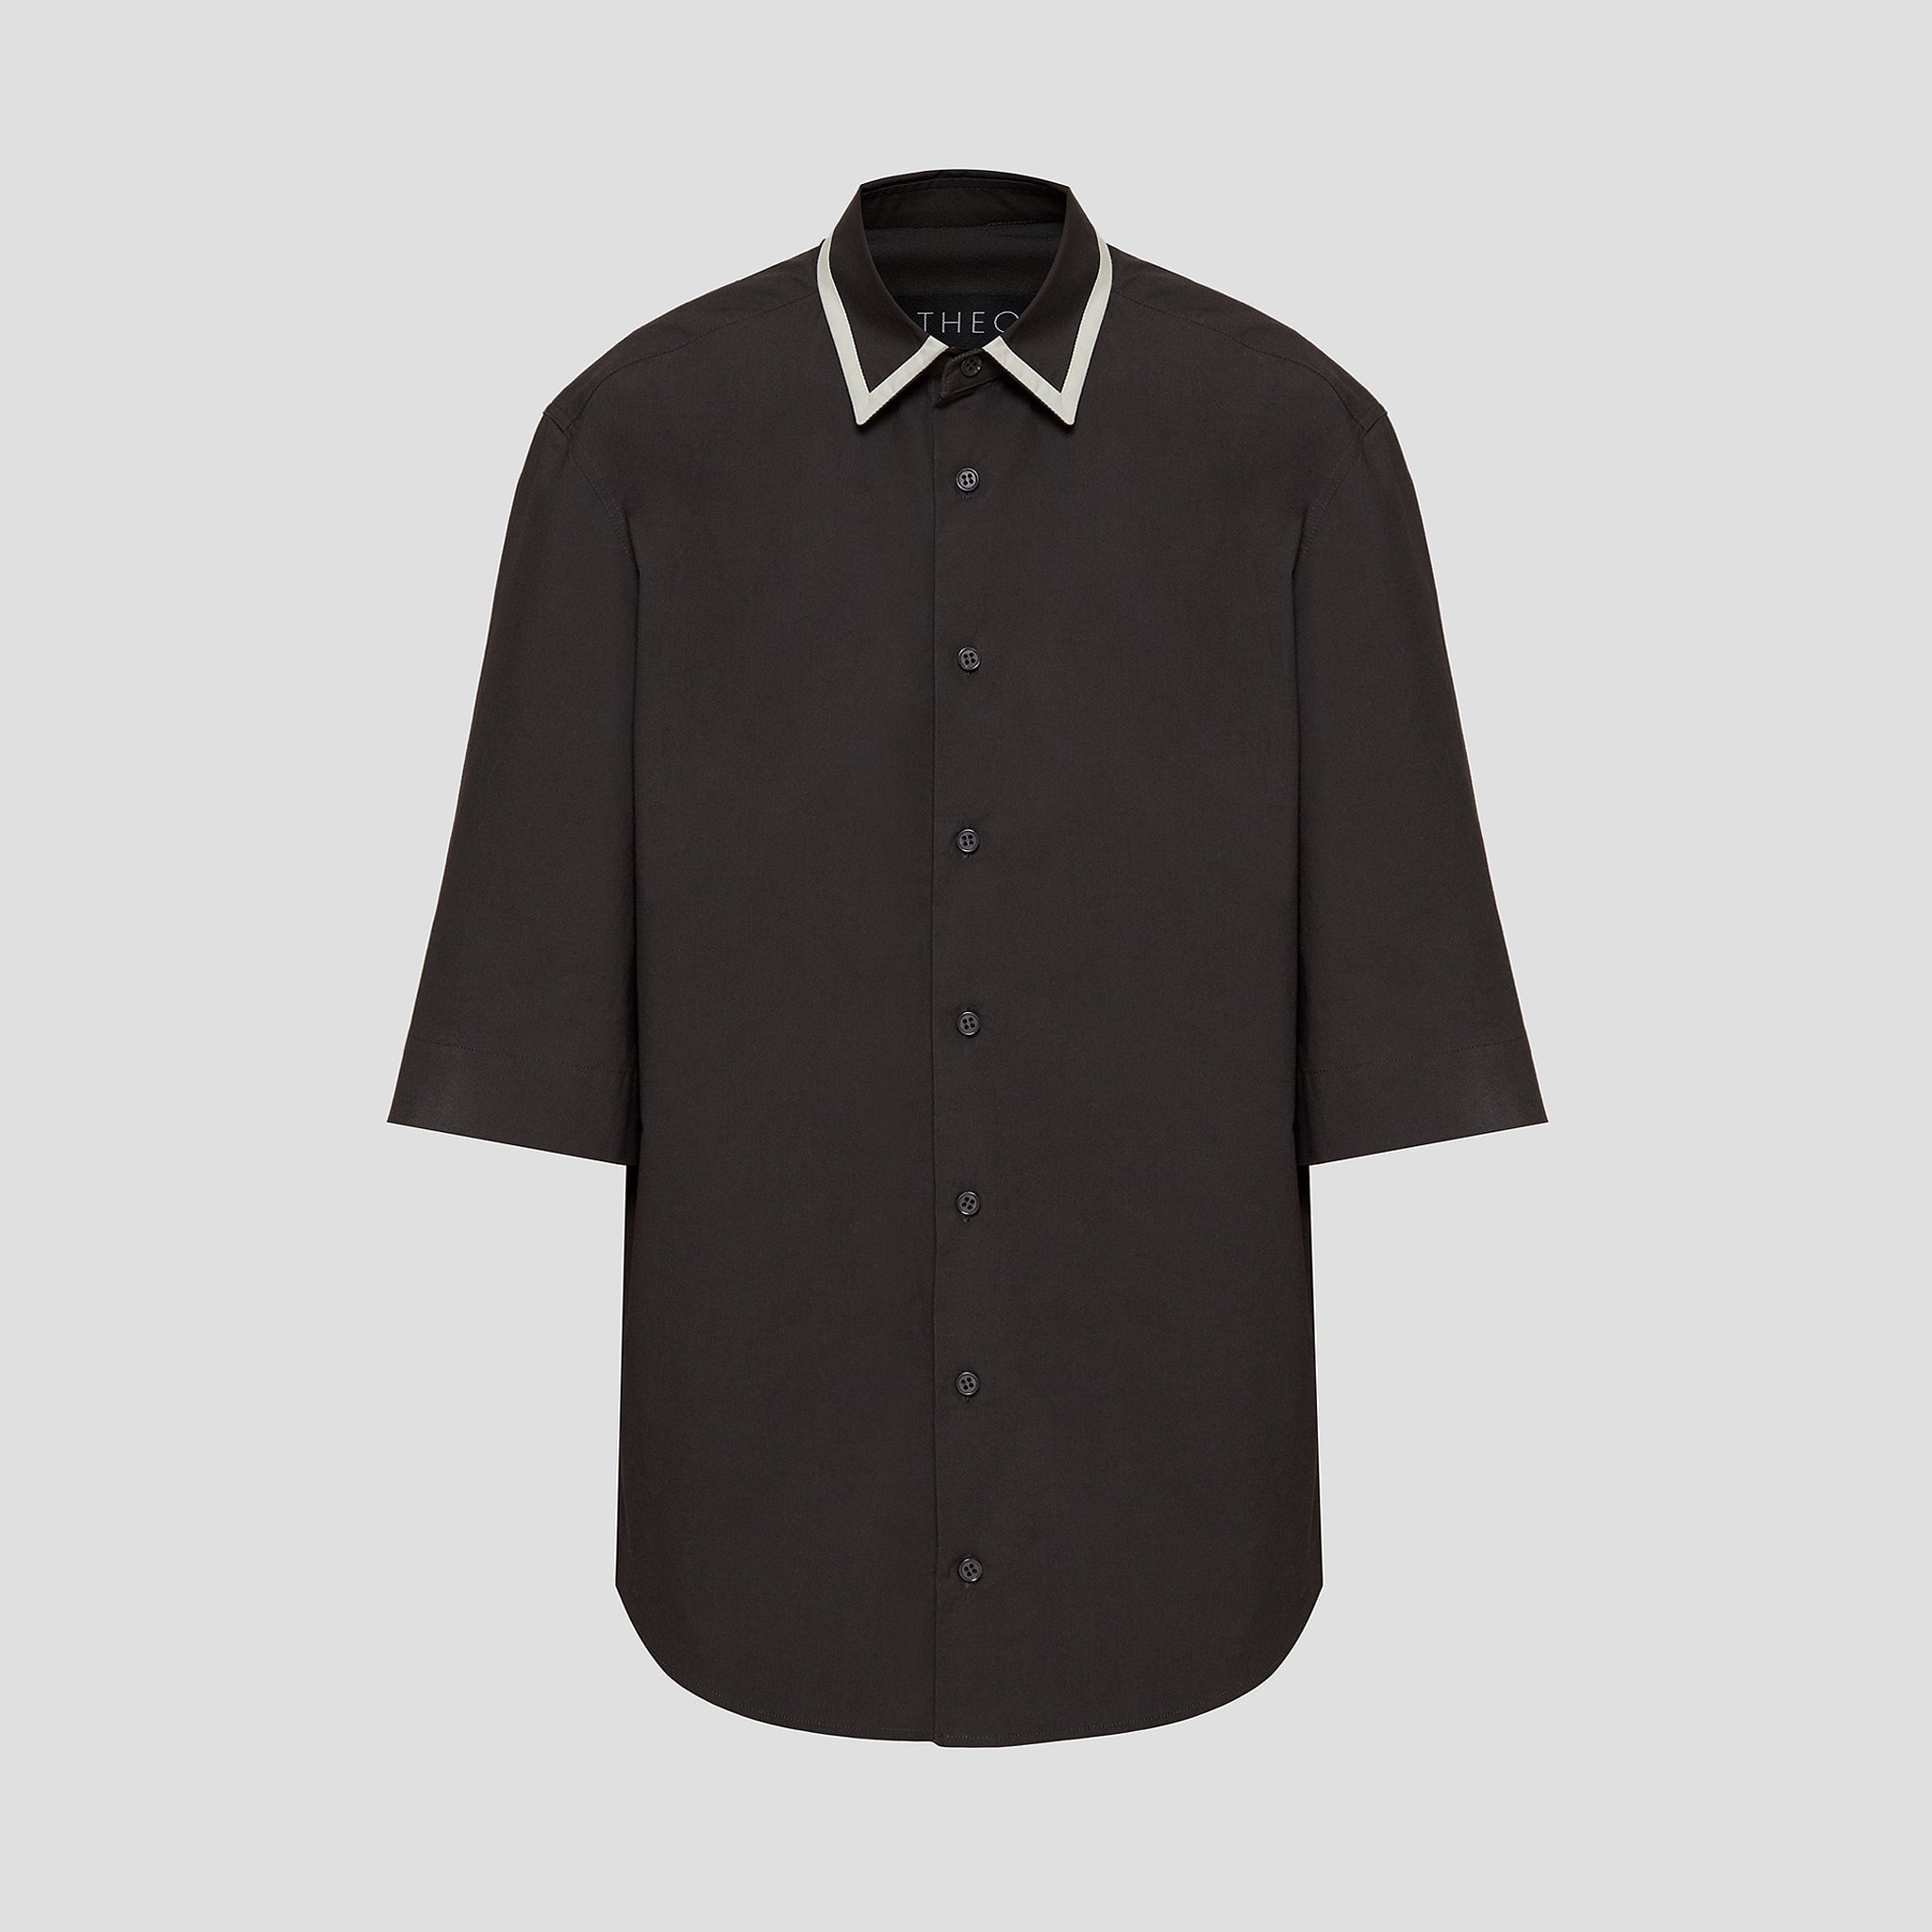 COTTON SHIRT WITH CONTRASTING COLLAR TRIM